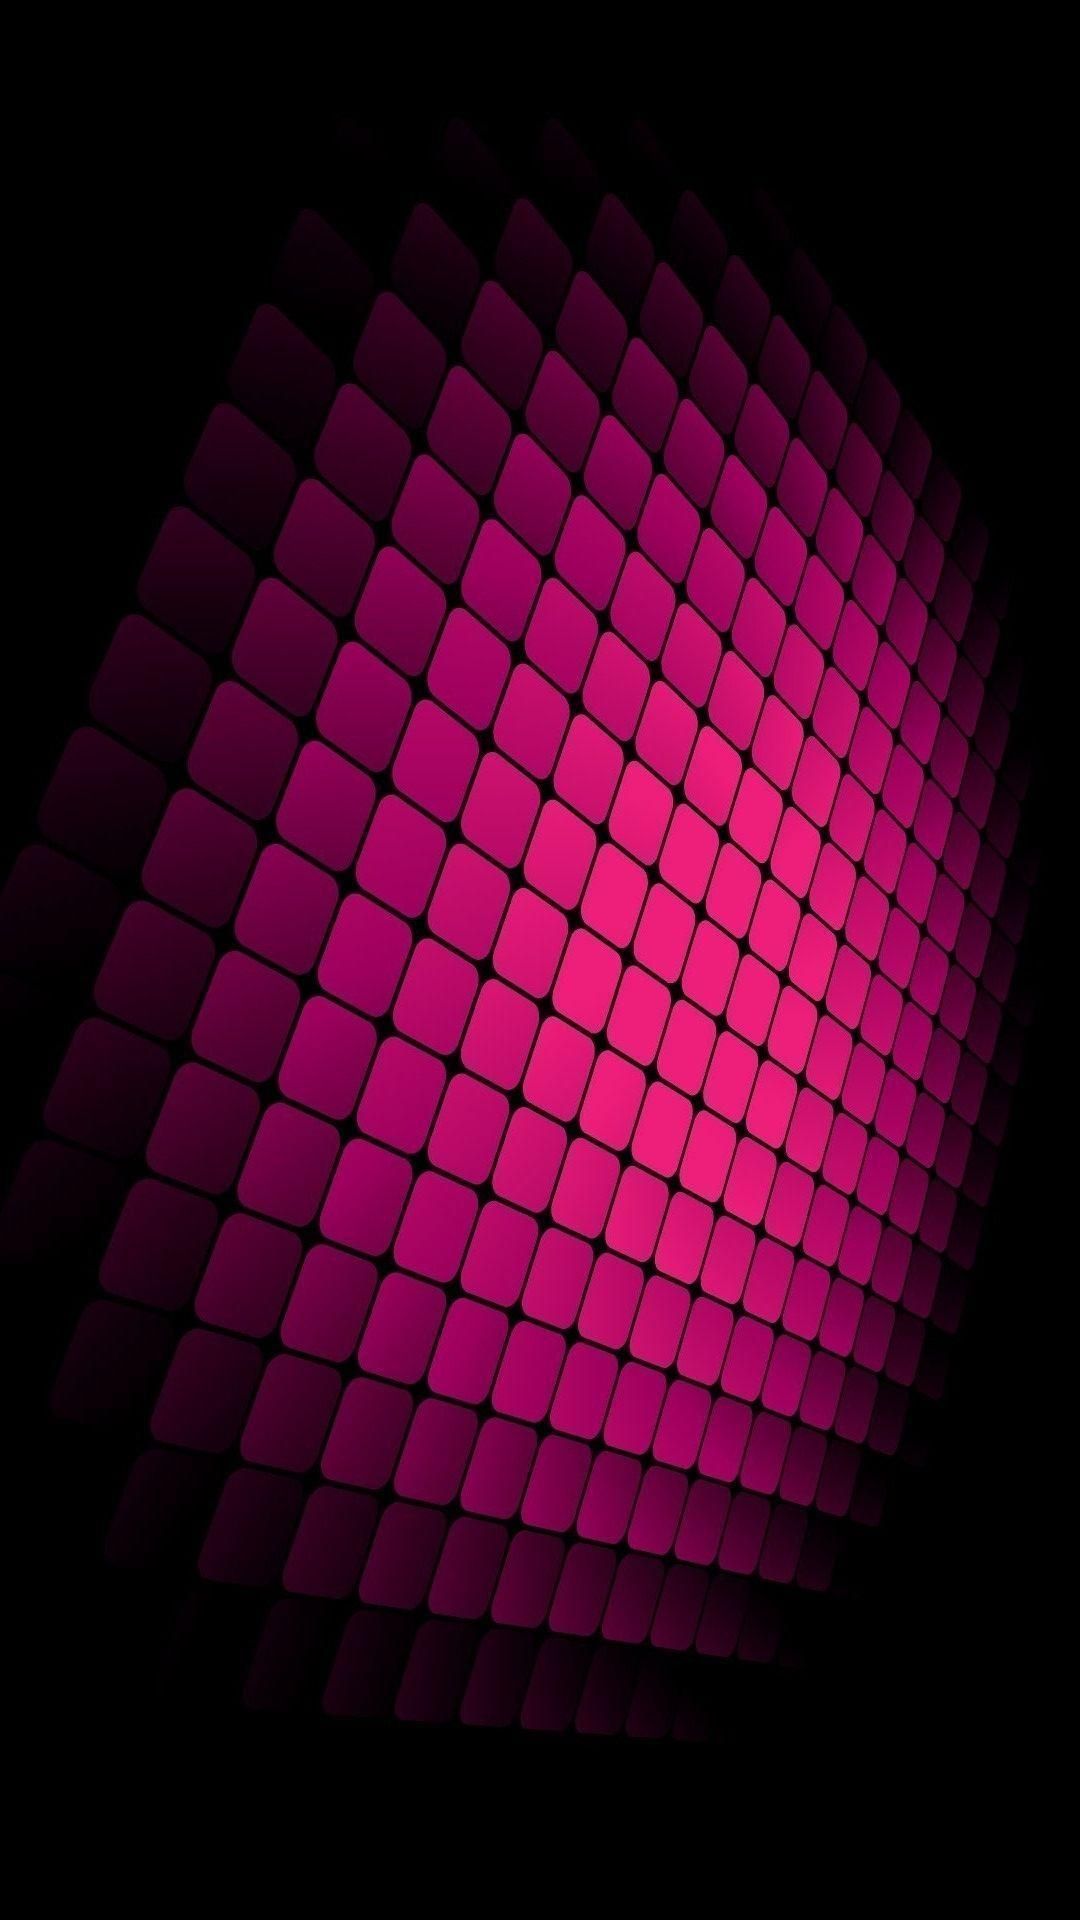 A purple and black background with squares - Magenta